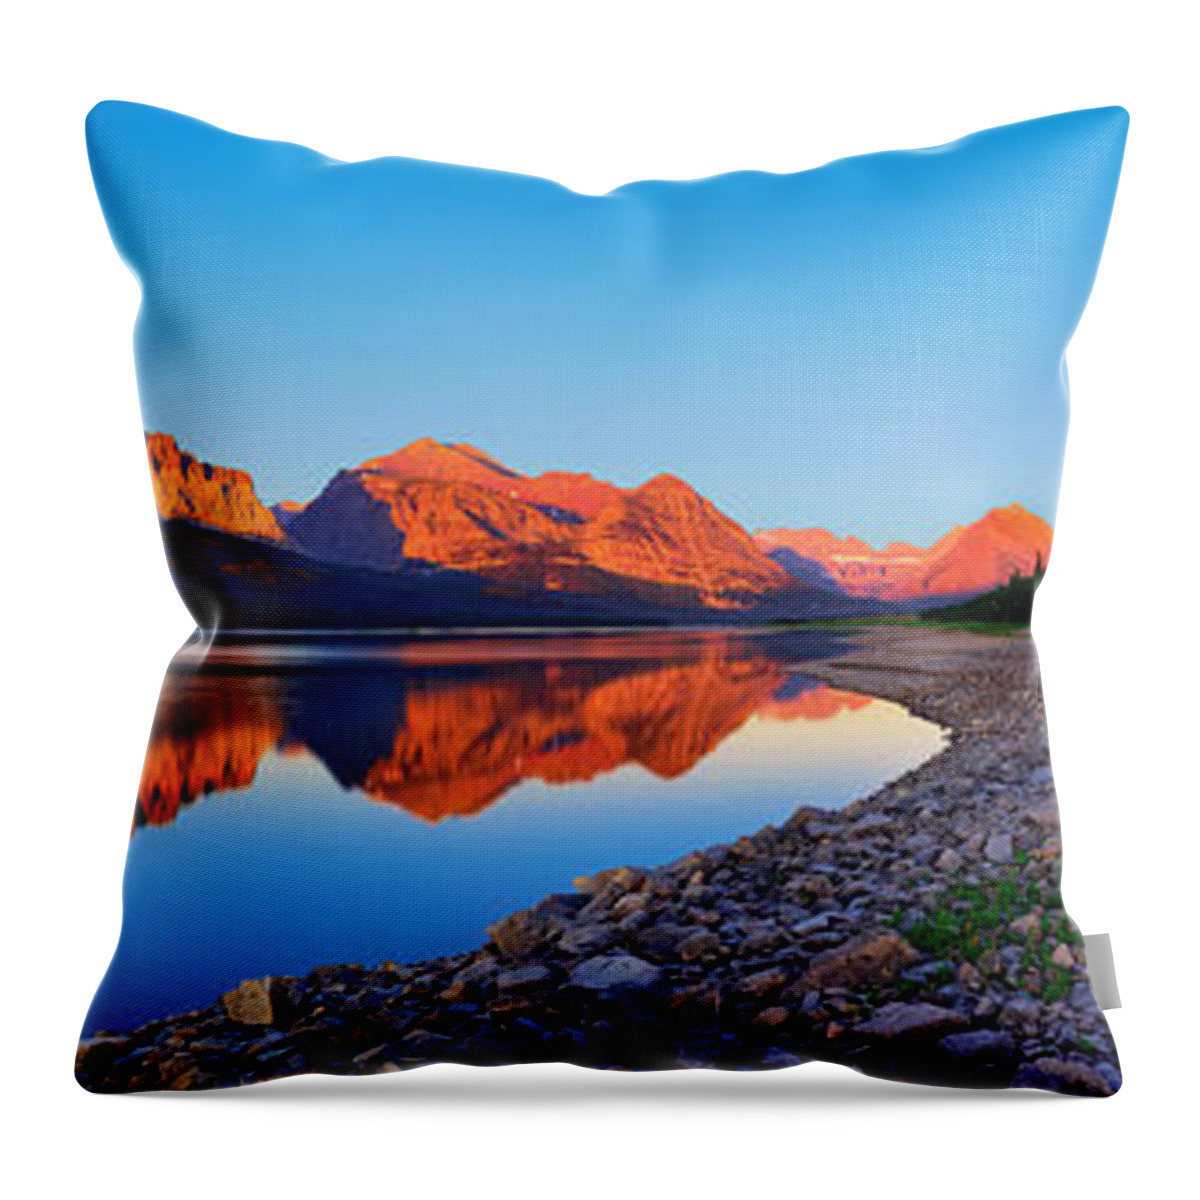 Lake Sherburne Throw Pillow featuring the photograph Sherburne Shore Sunrise Panorama by Greg Norrell